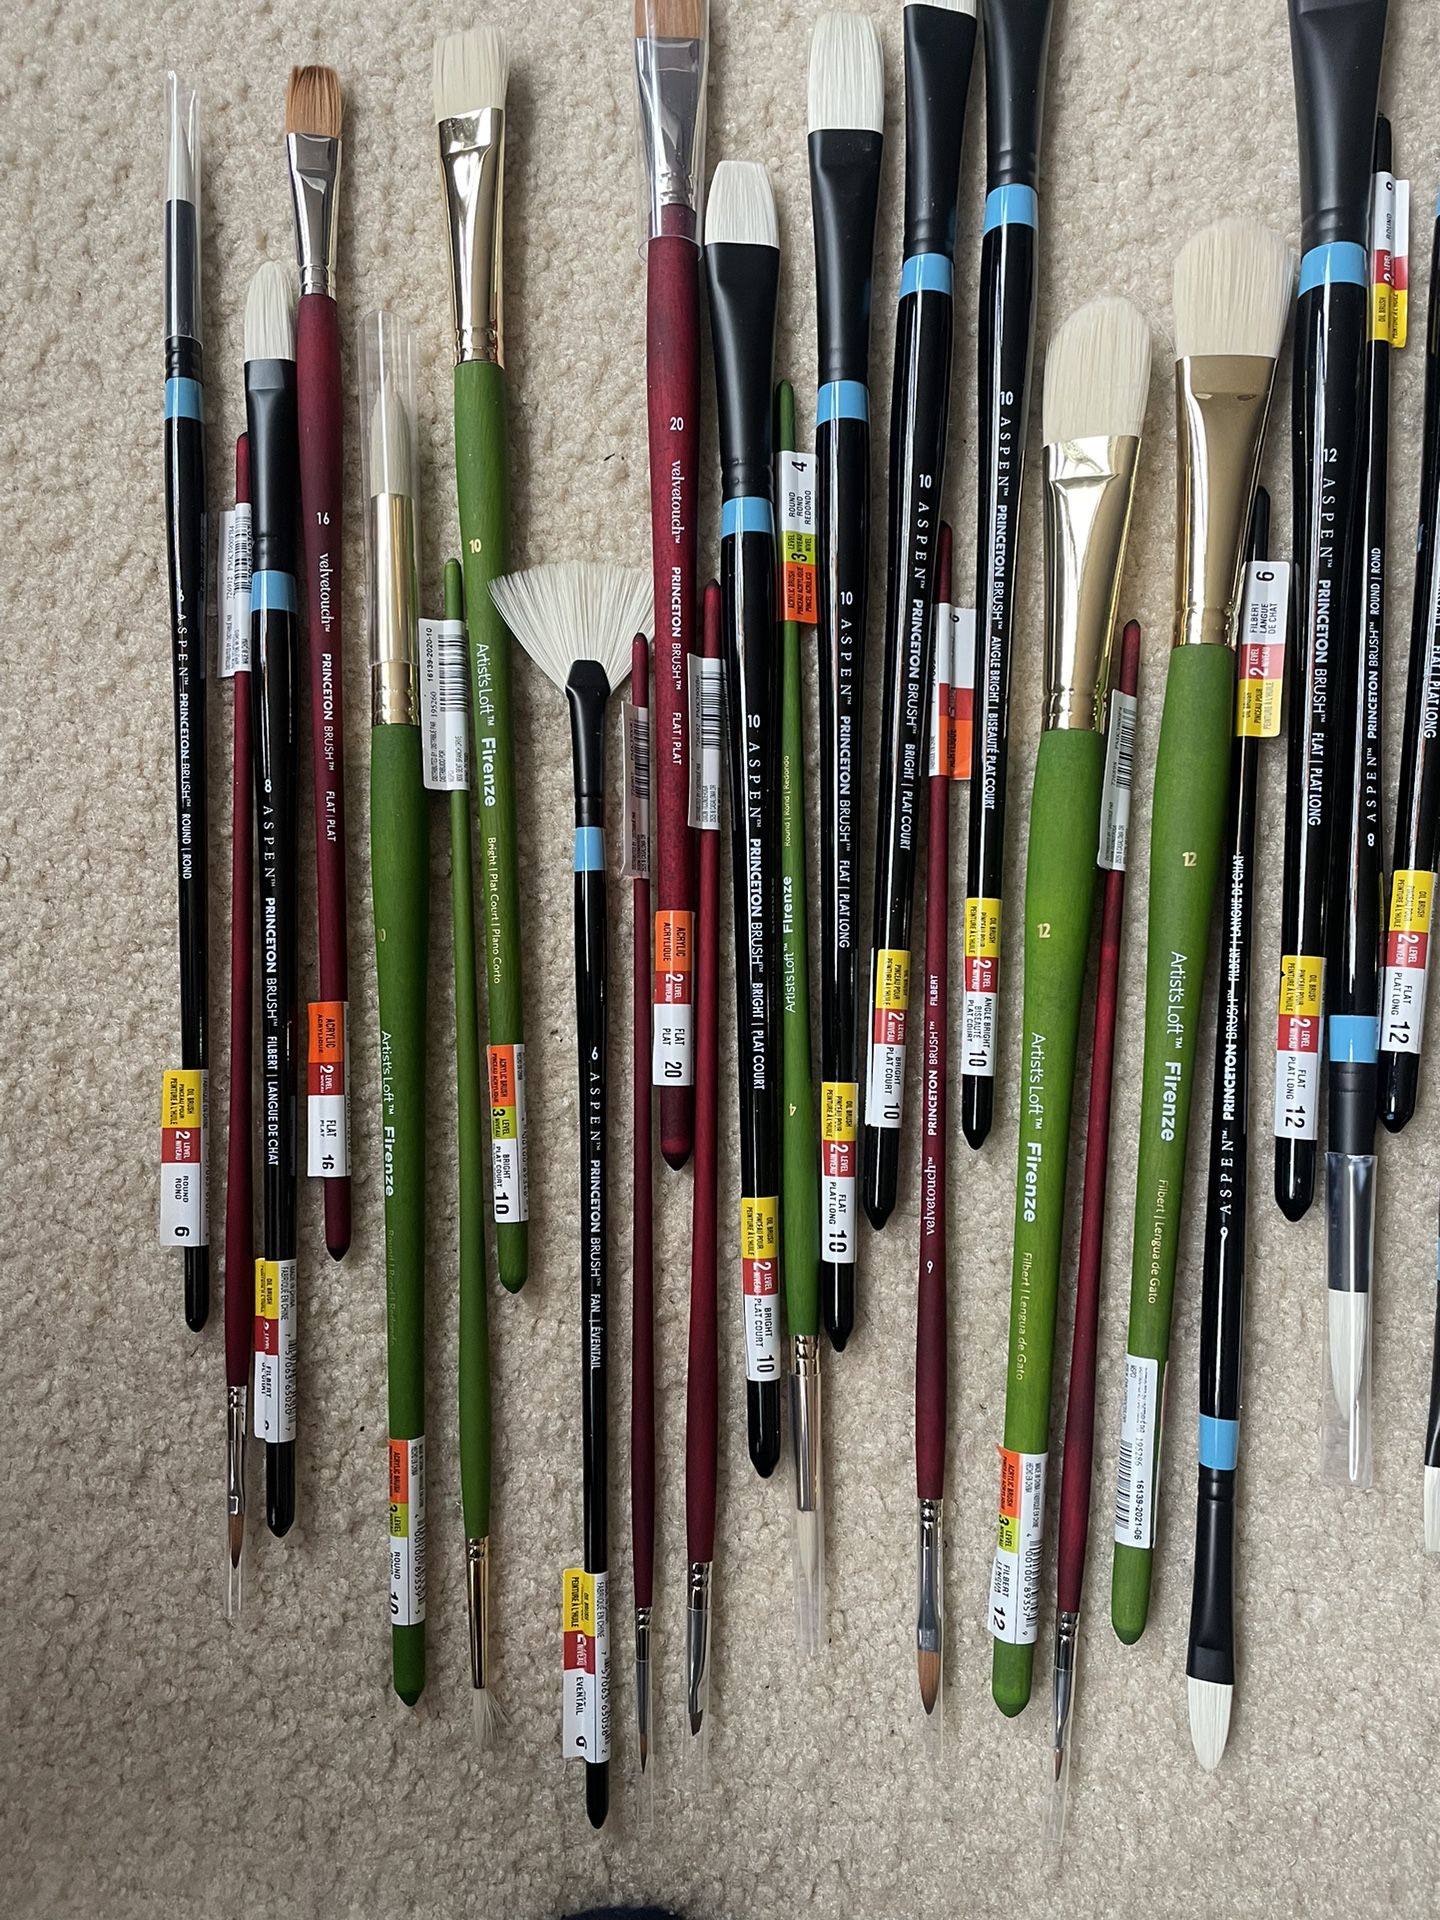 Artists Dream-35 High End Paint Brushes